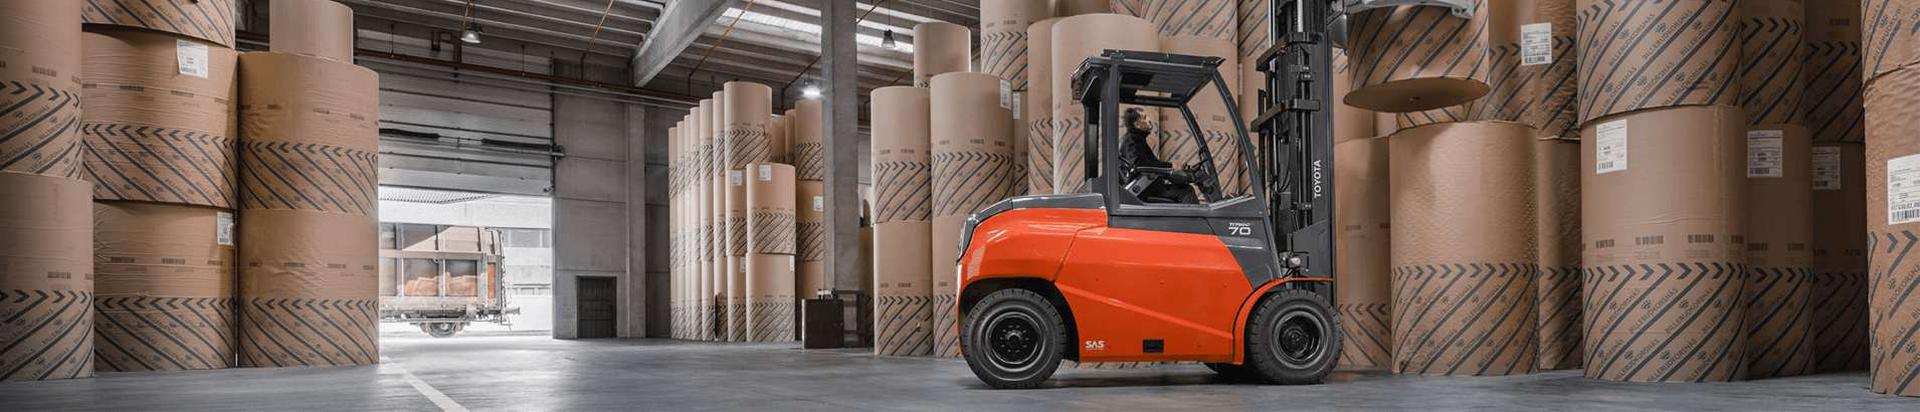 Buy and rent BT pallet trucks and Toyota forklifts with good quality and service. Explore our wide selection of hand pallet trucks, forklifts, rental, and services.